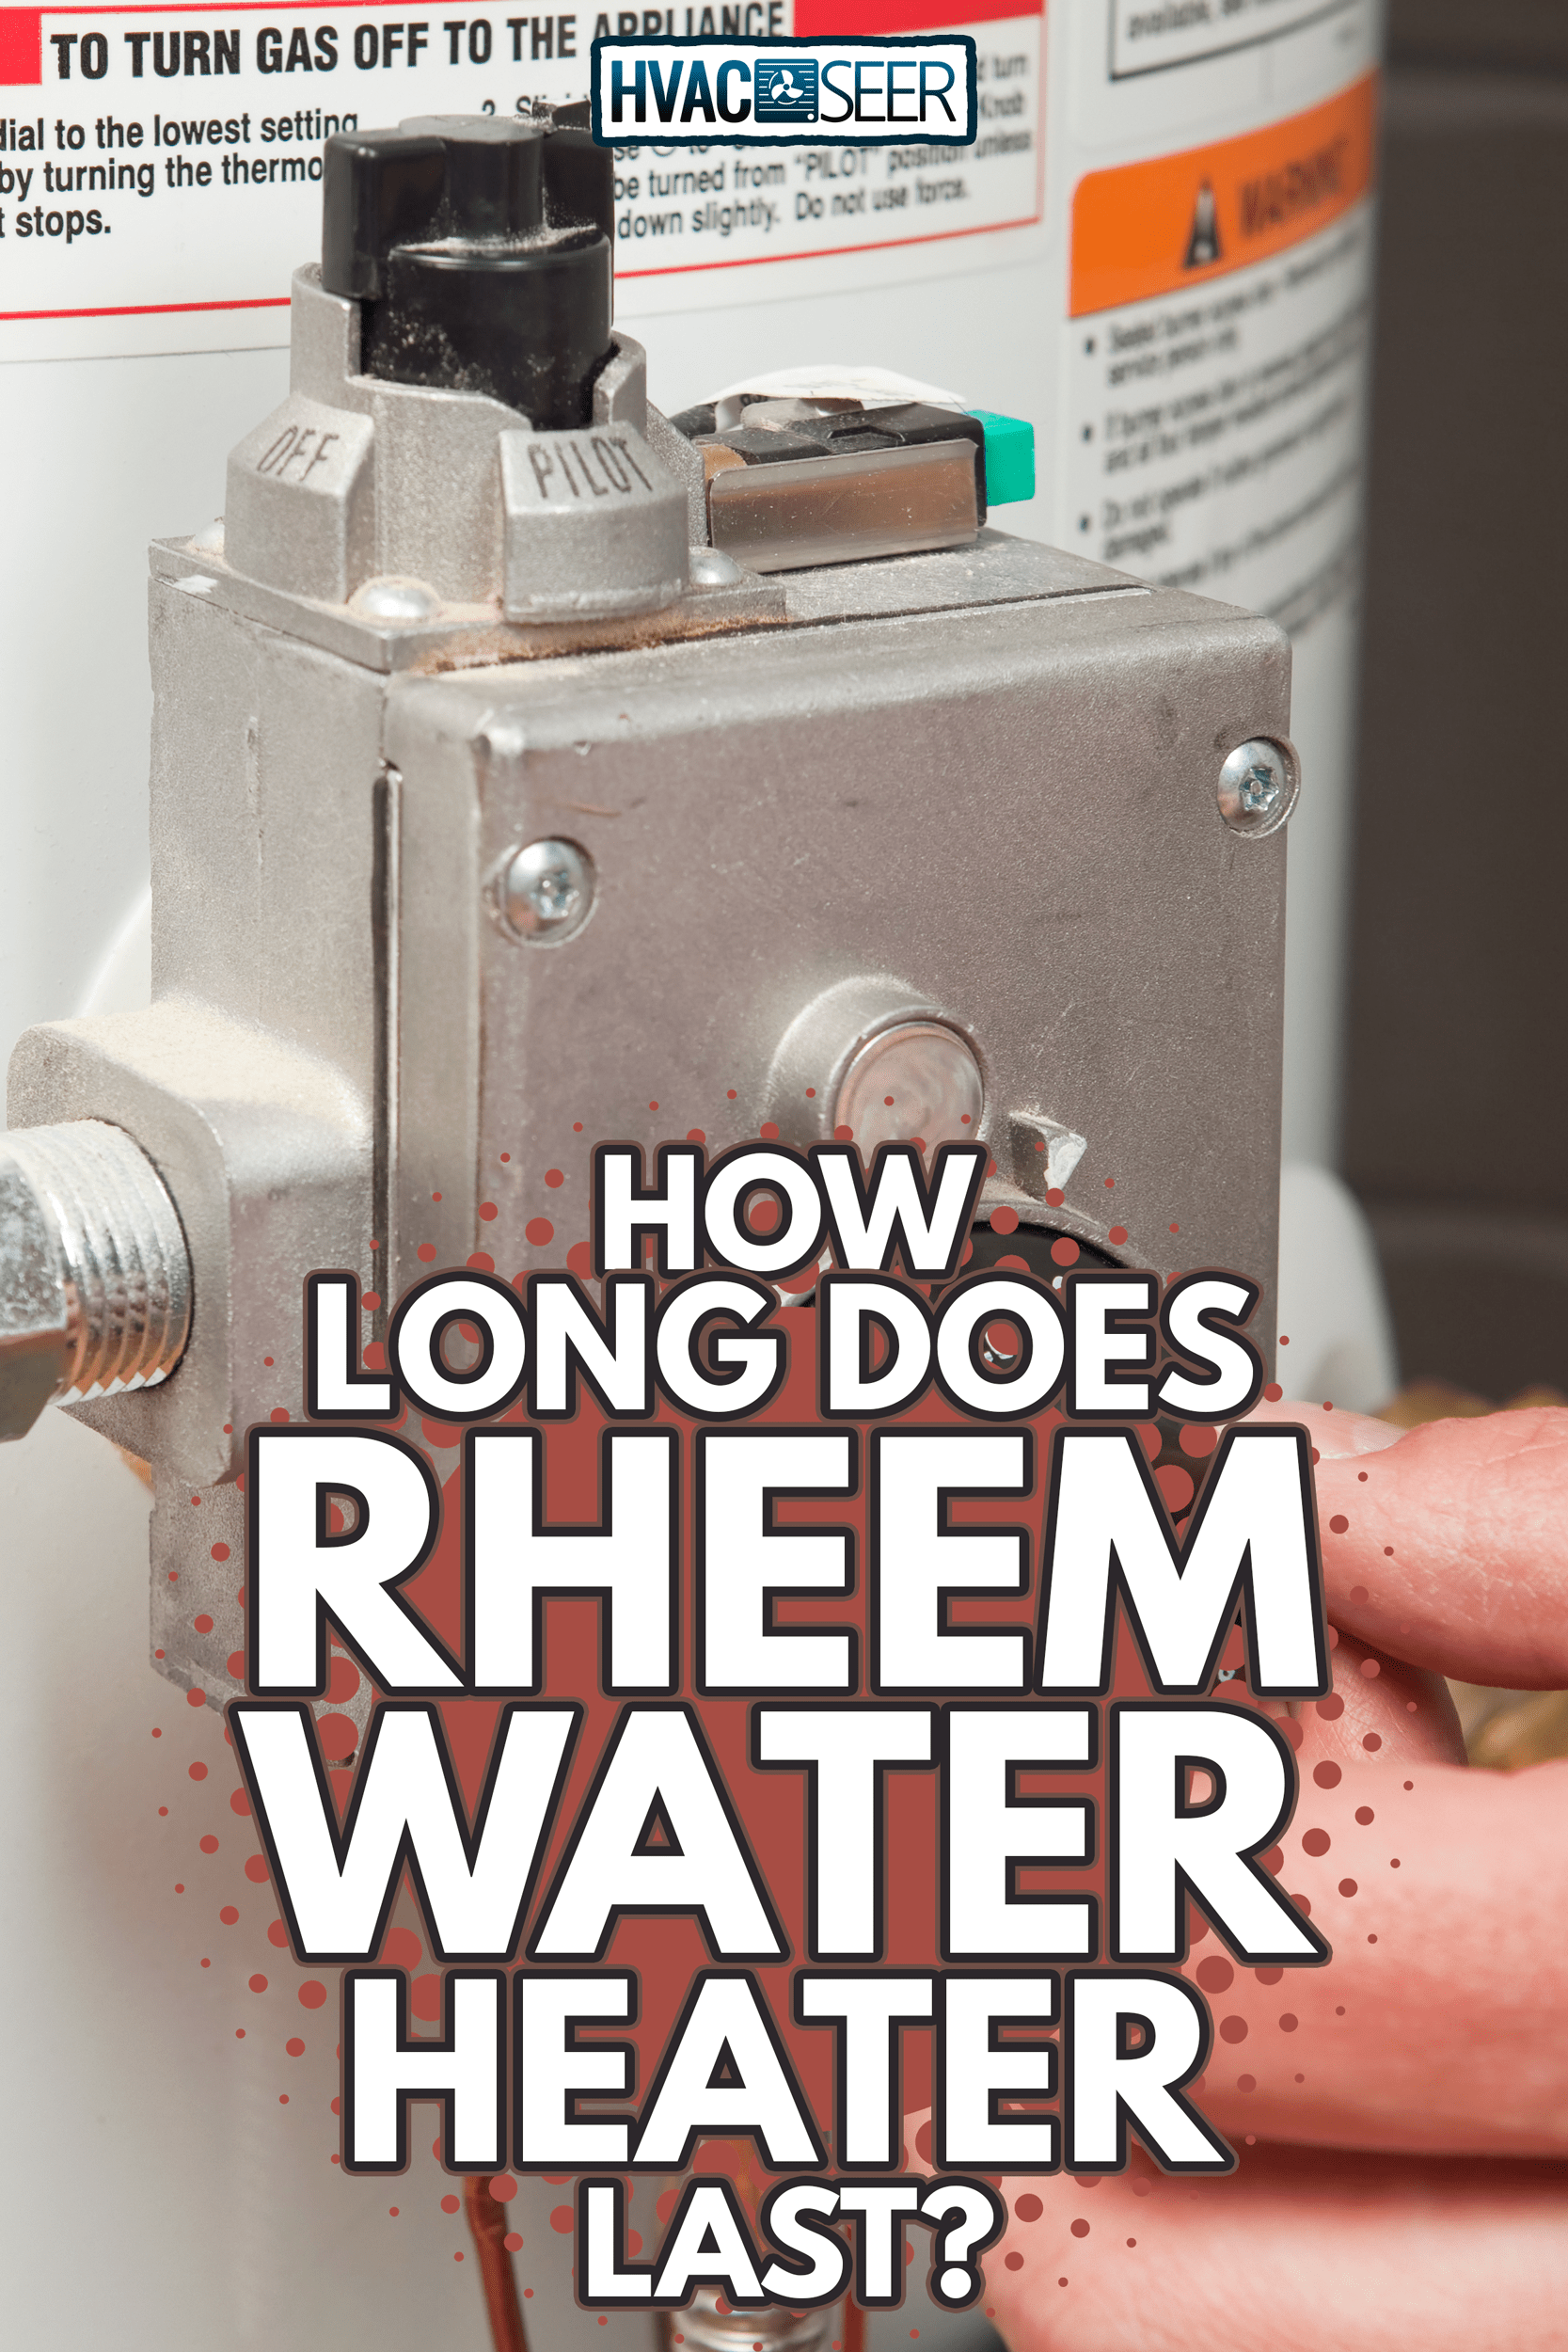 Hand Turning Down Water Heater Thermostat - How Long Does Rheem Water Heater Last